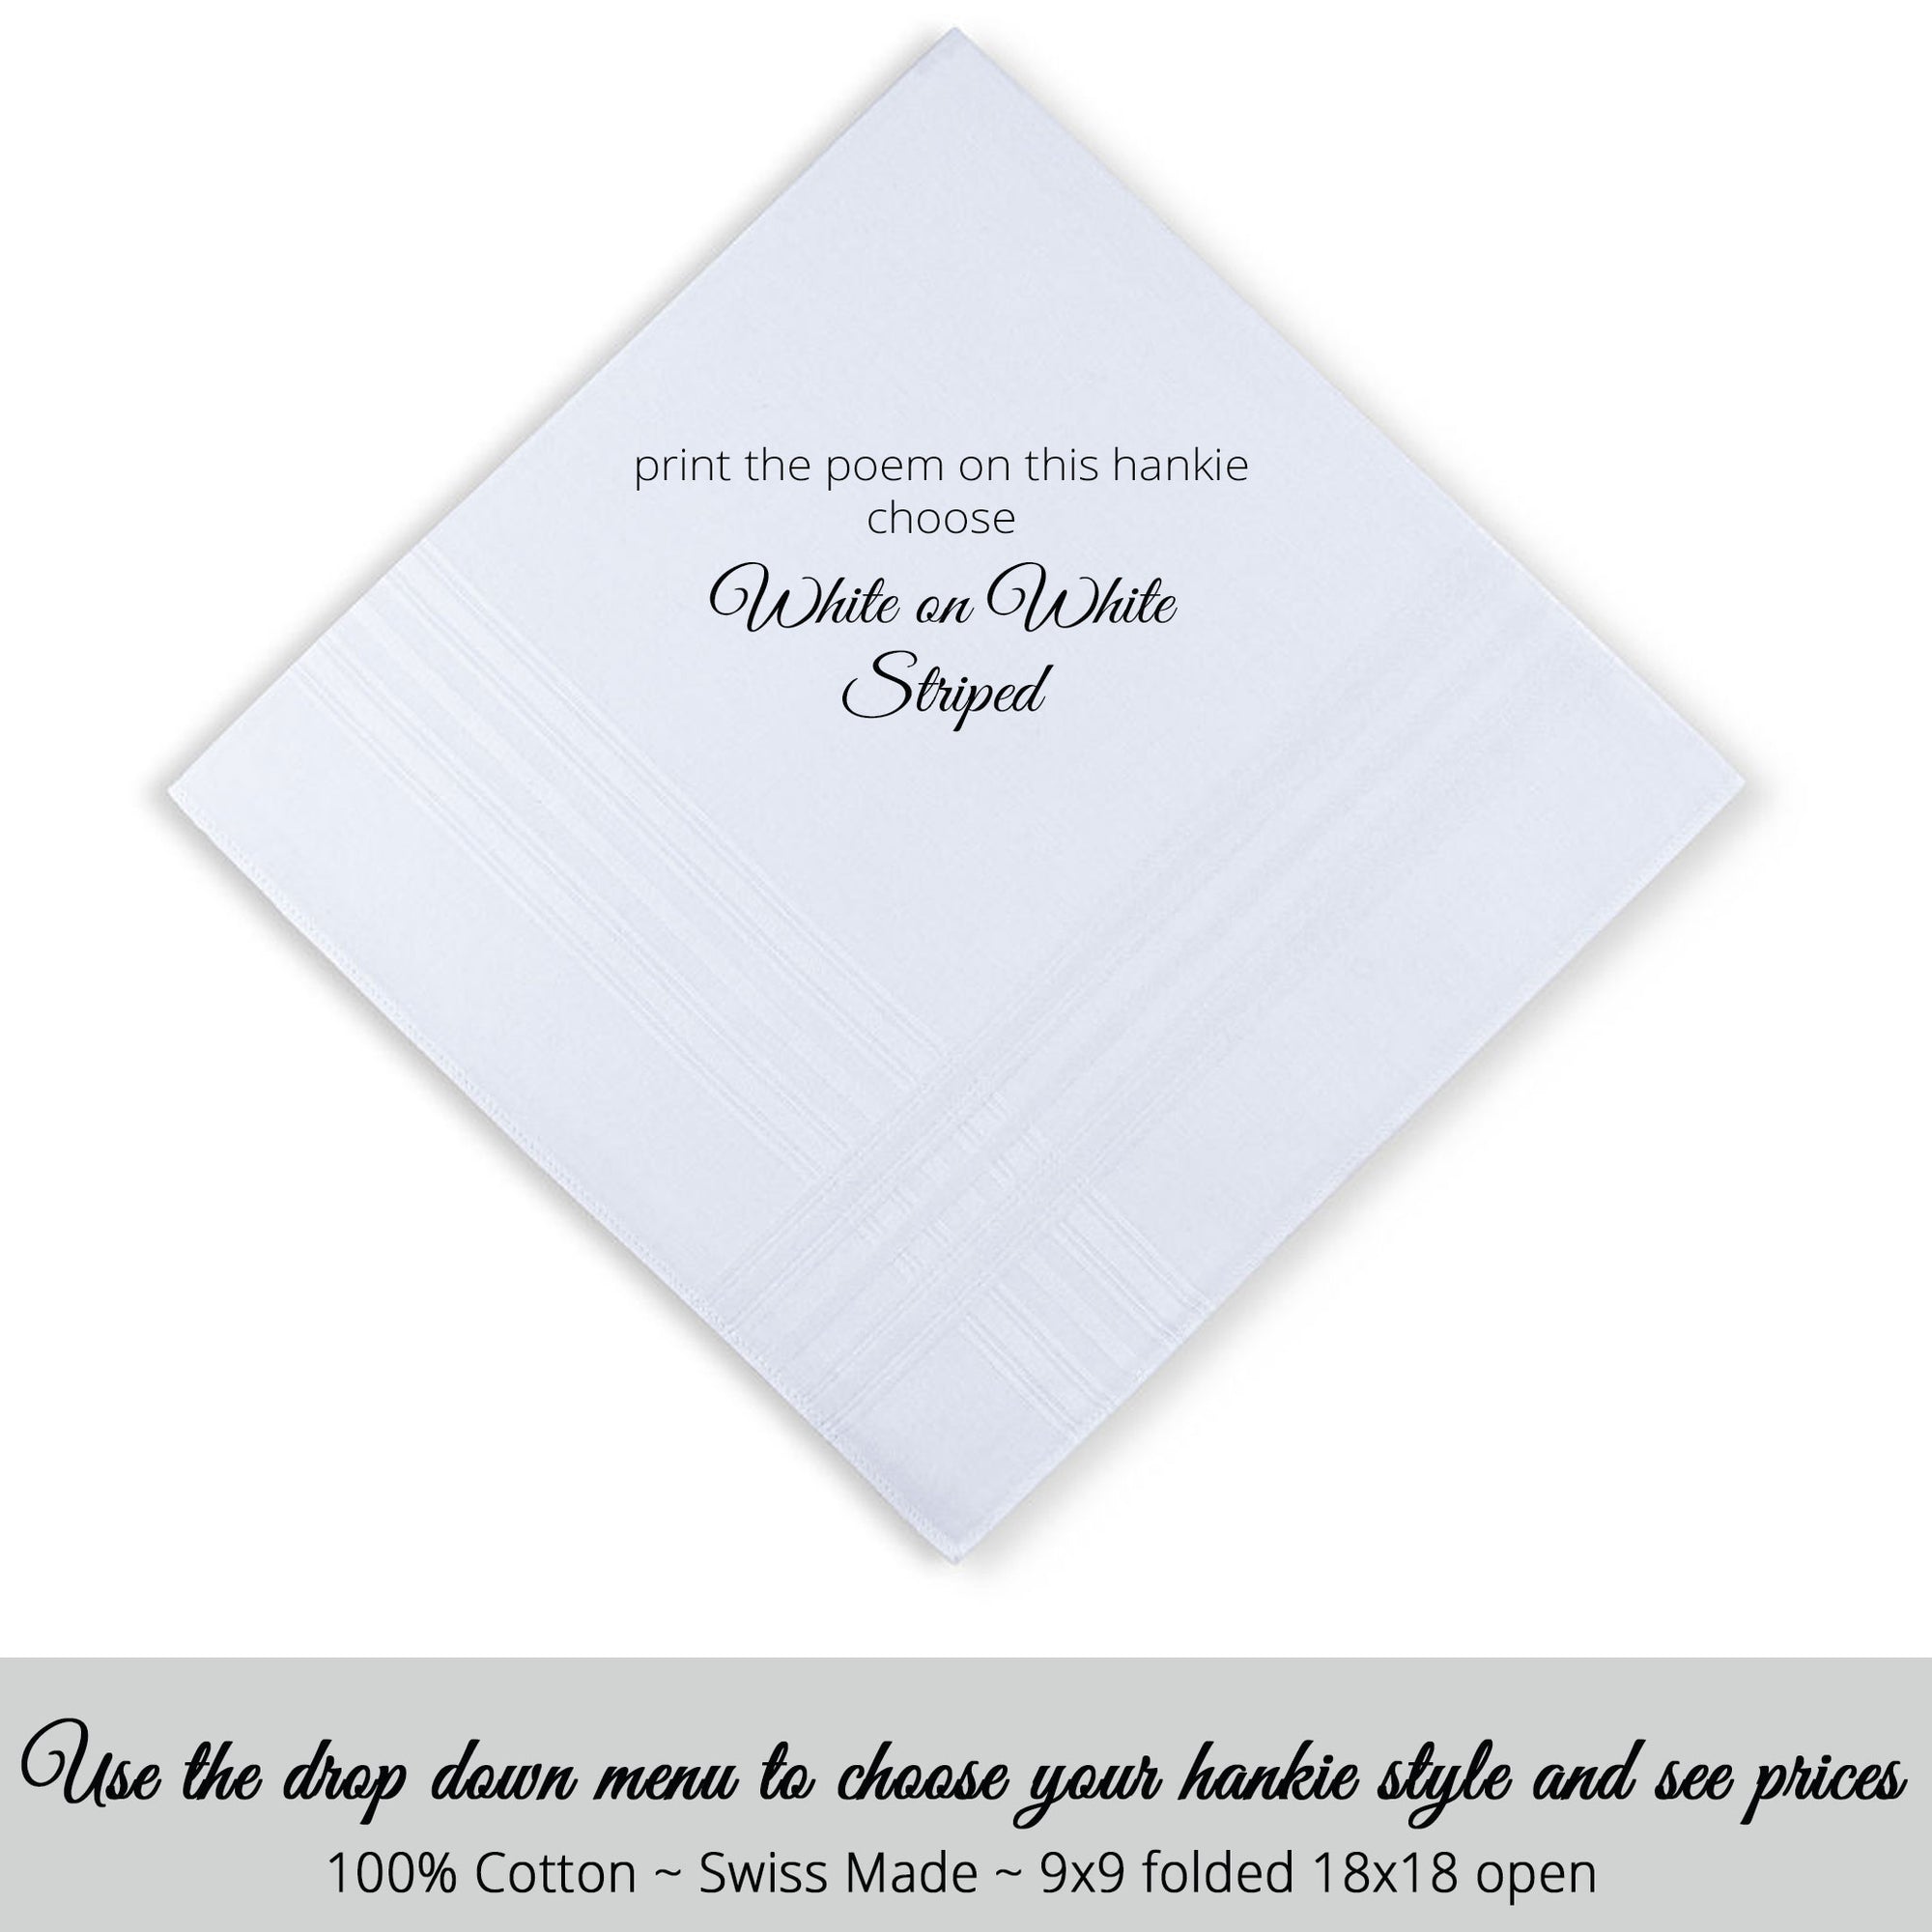 Wedding Handkerchief Swiss made man’s white on white striped for personalized poem for the grandfather of the bride